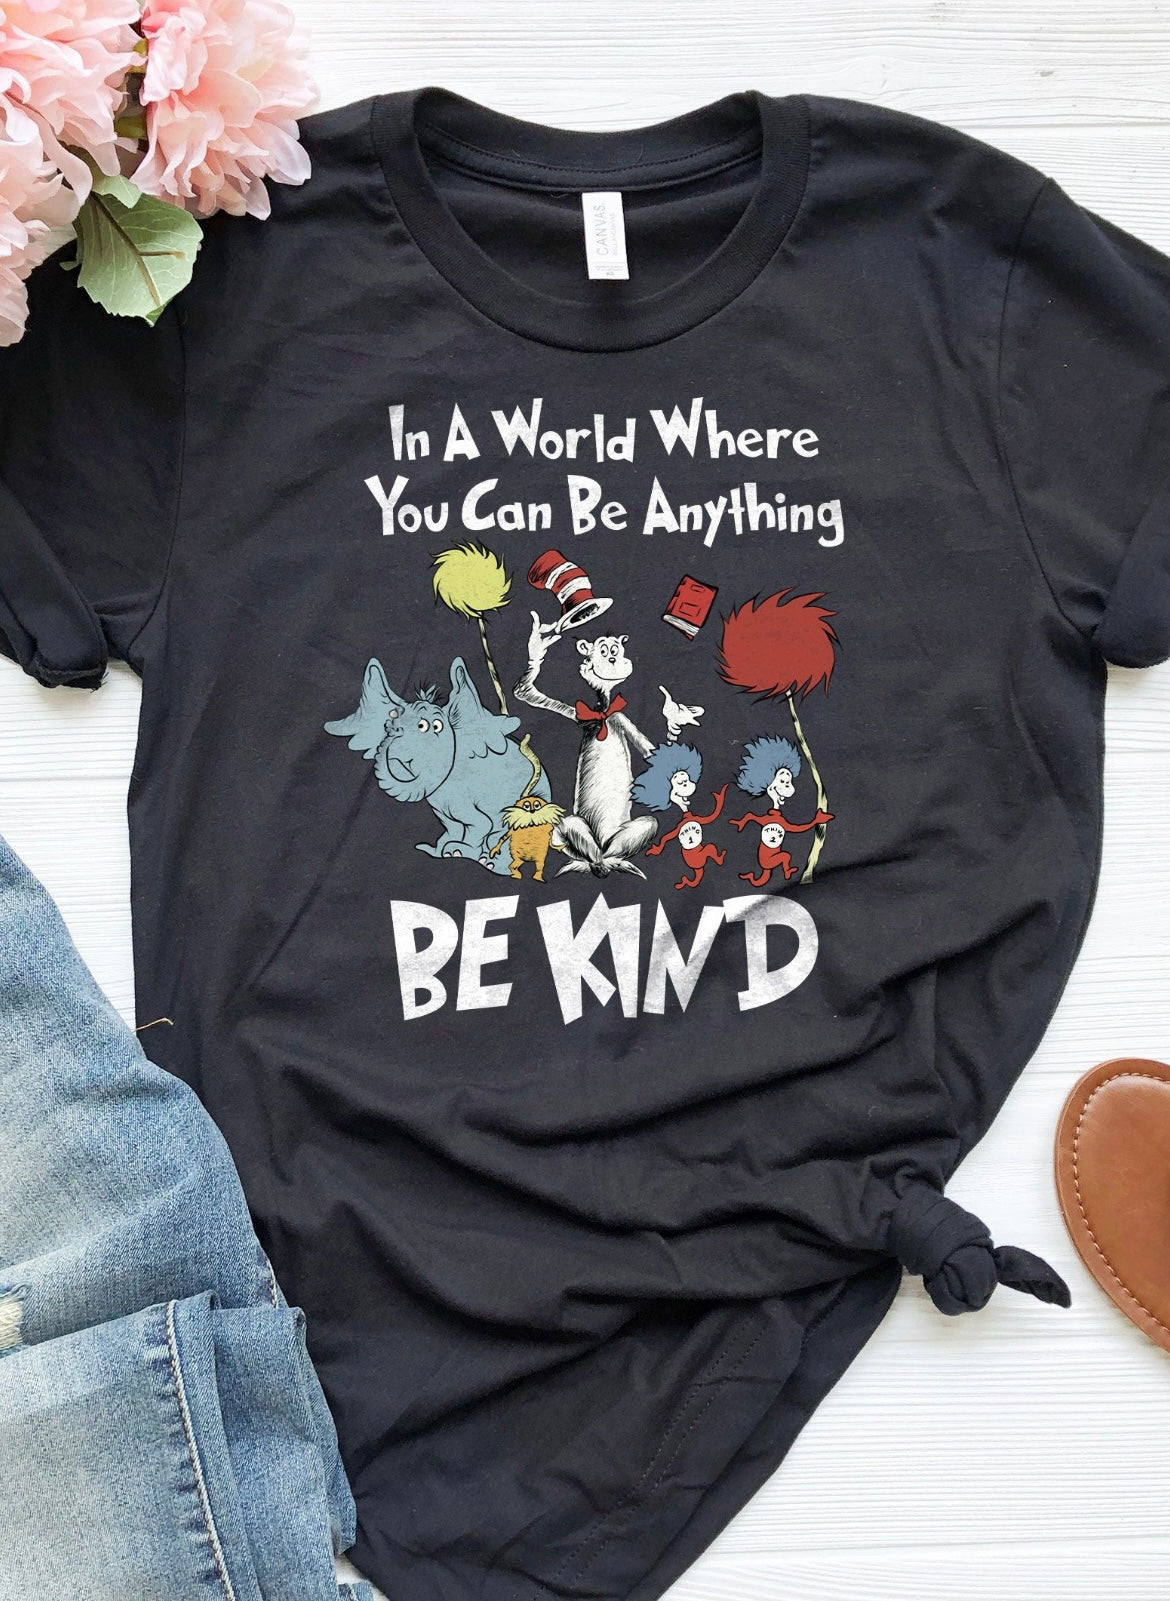 In a world where you can be anything be kind - 0